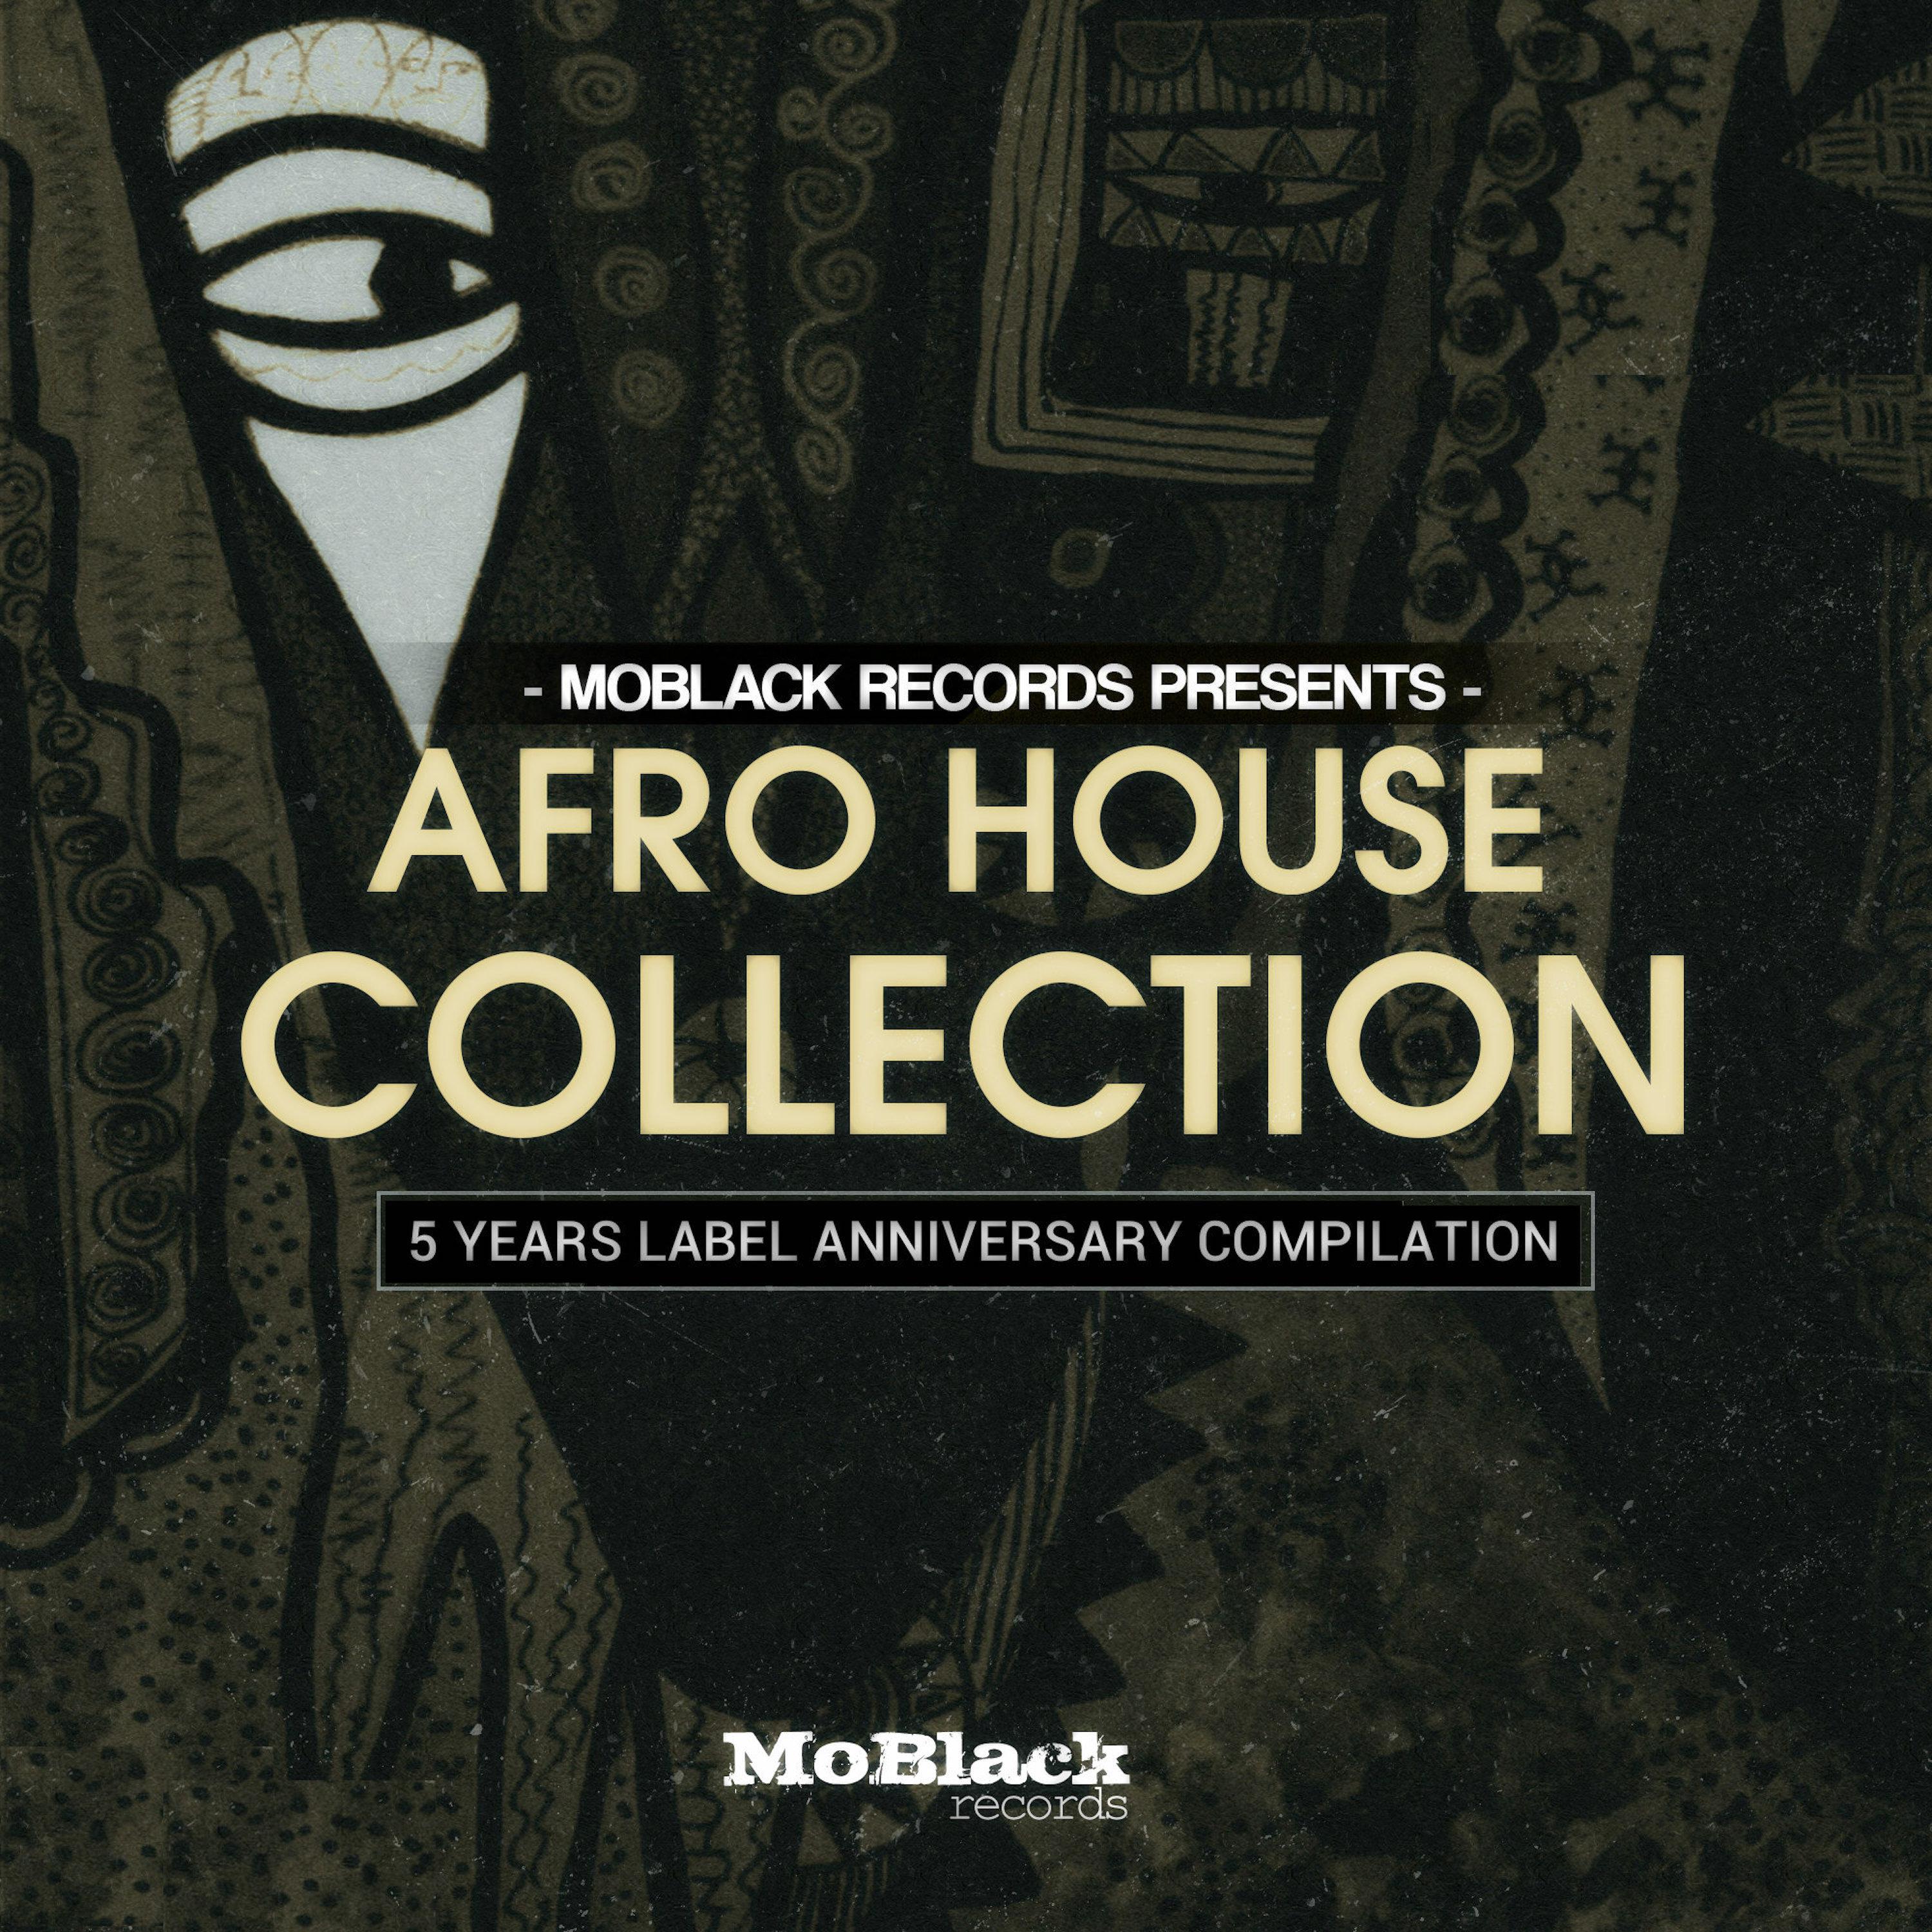 MoBlack Records presents: Afro House Collection (5 Years Label Anniversary Compilation)